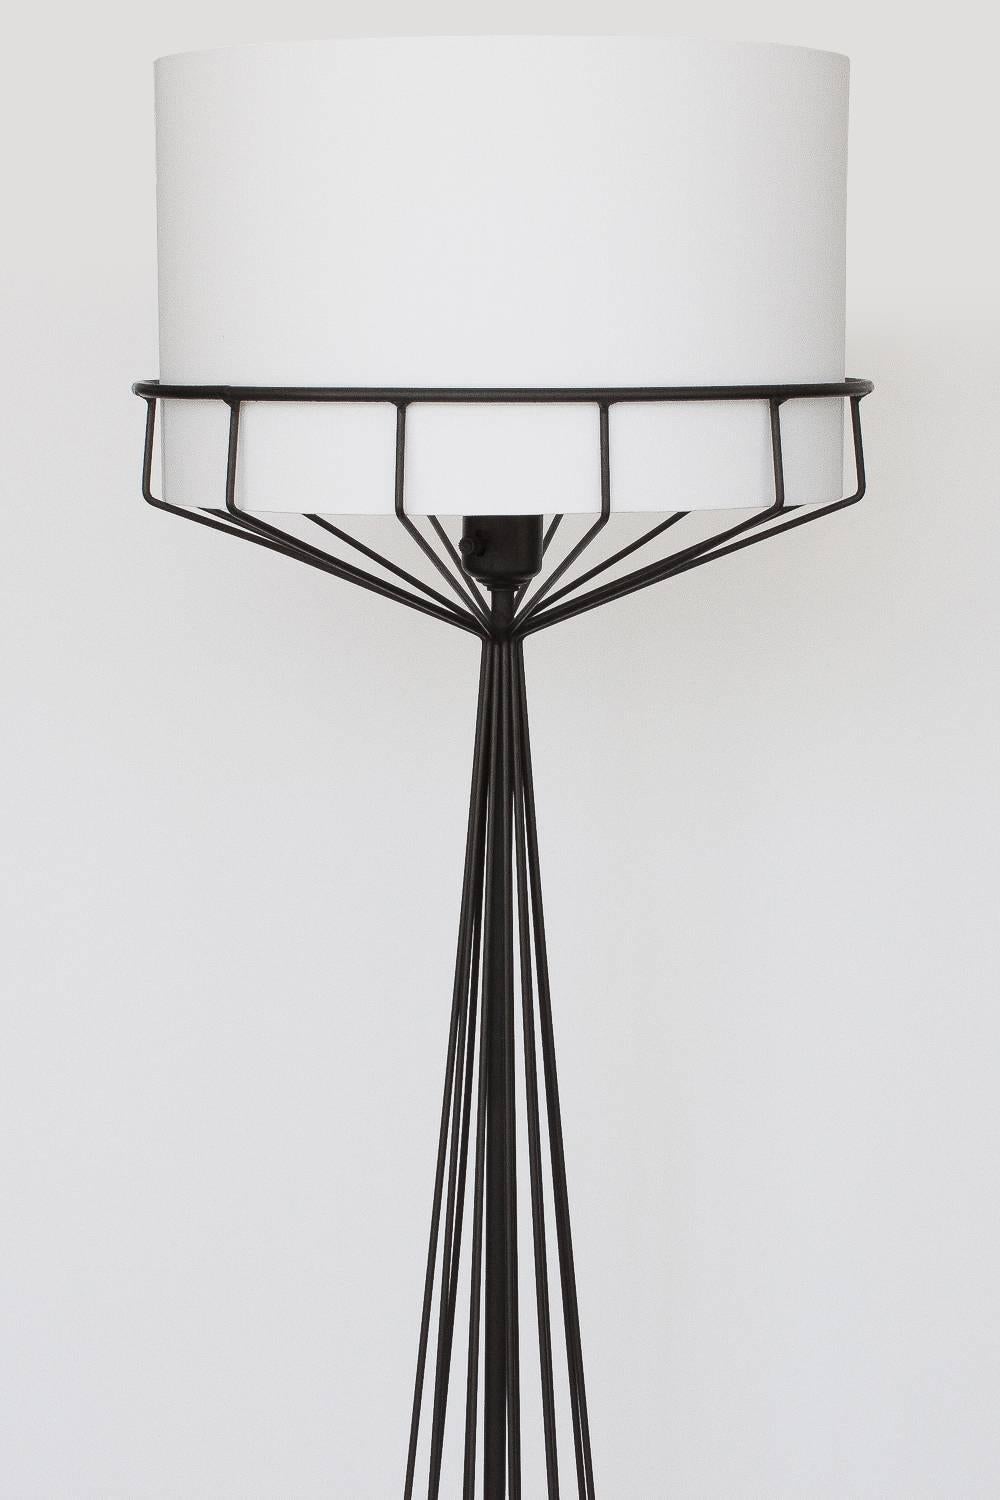 Black wire frame floor lamp designed by Tony Paul from the wire series, circa 1950s. Striking hourglass shape that opens up to cradle the round shade. The shade has been replaced with a white cotton 10" H x 16" DIA cylinder shade and is